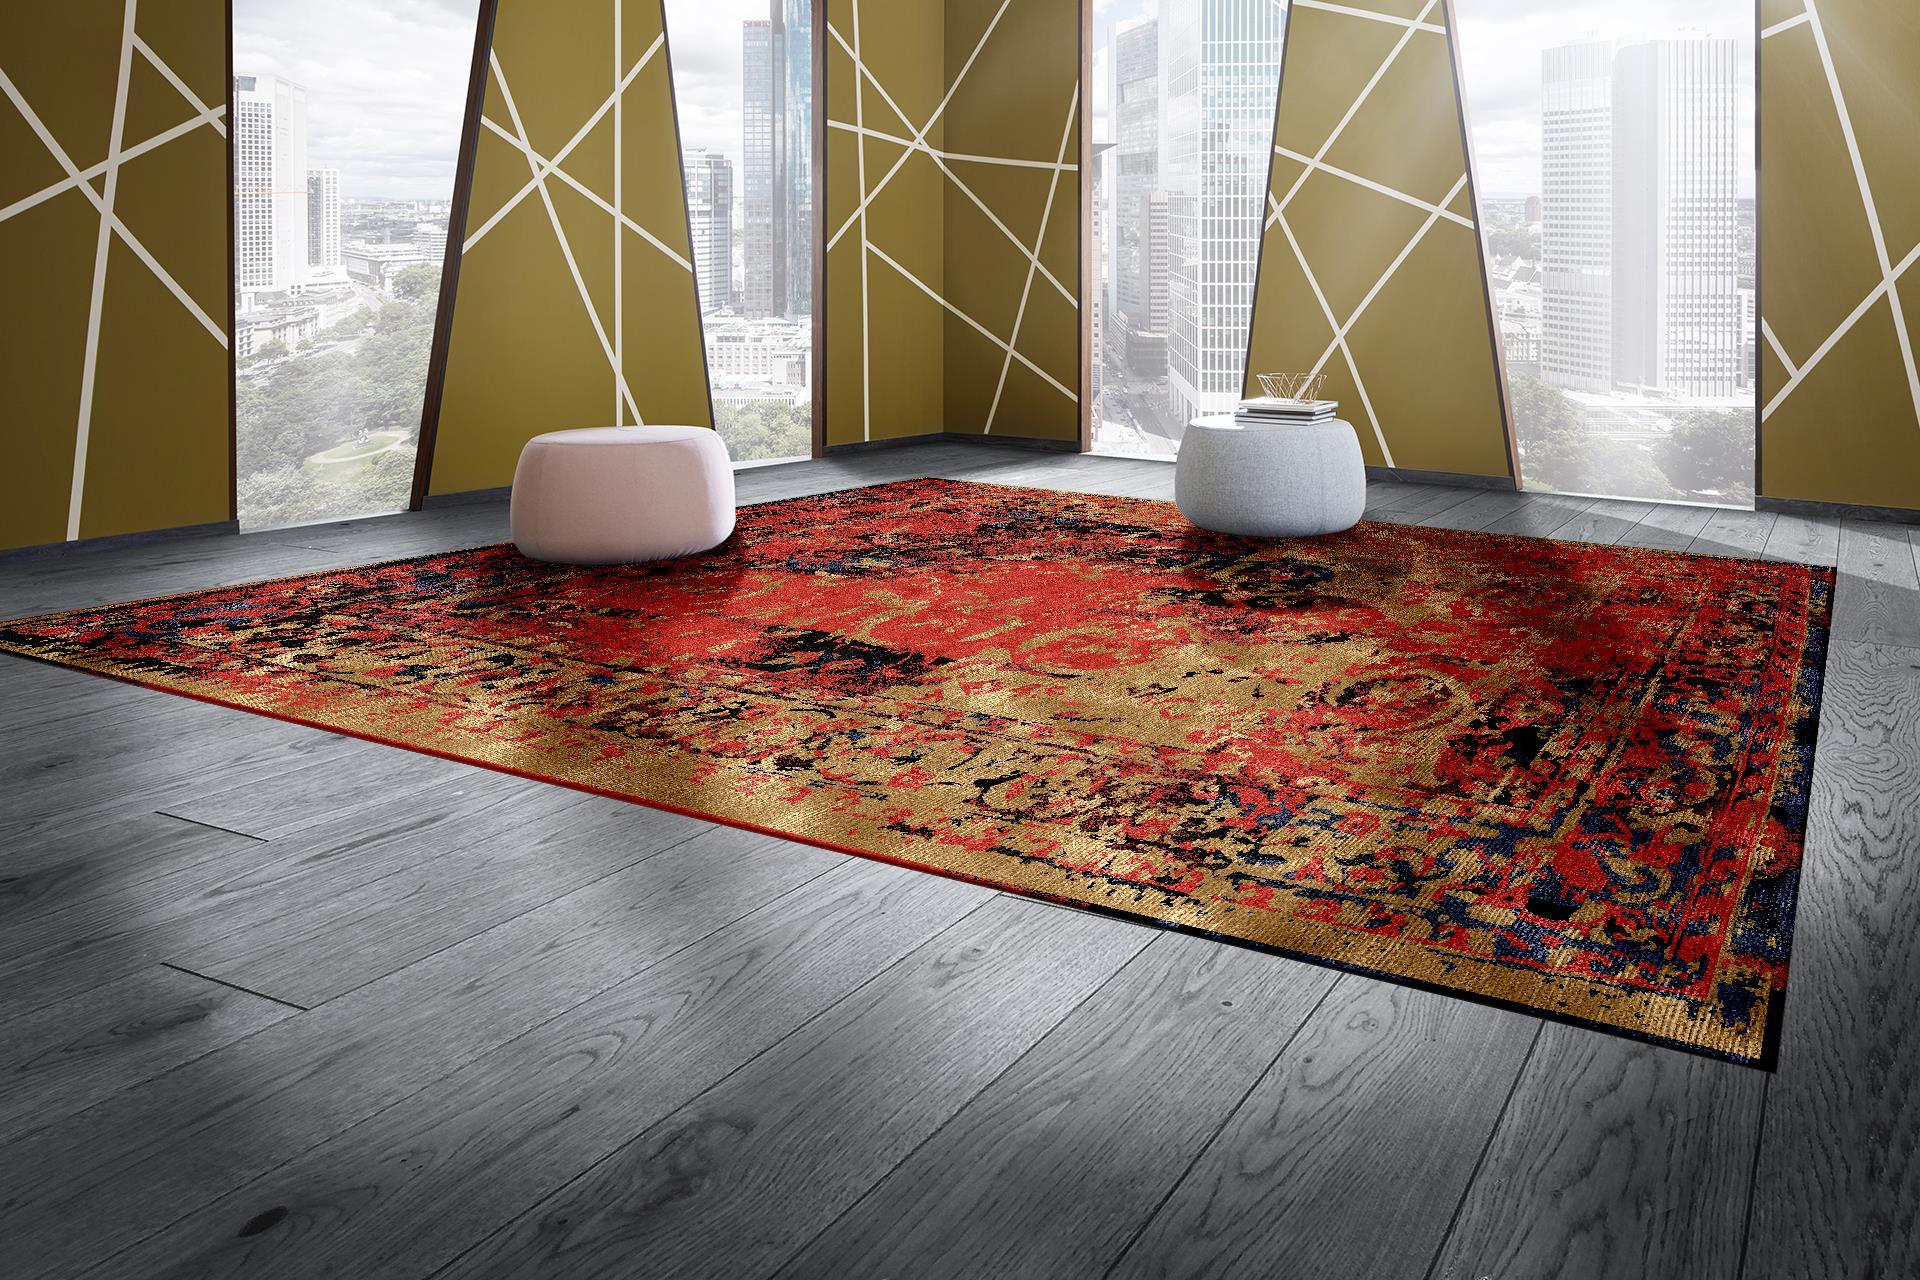 A beautiful contemporary design carpet, made to order, hand knotted using finest Chinese mulberry silk and Tibetan Highland Wool. The design originates in traditional Persian Tabriz Carpets featuring a Classic center Medaillon, floral motives in the